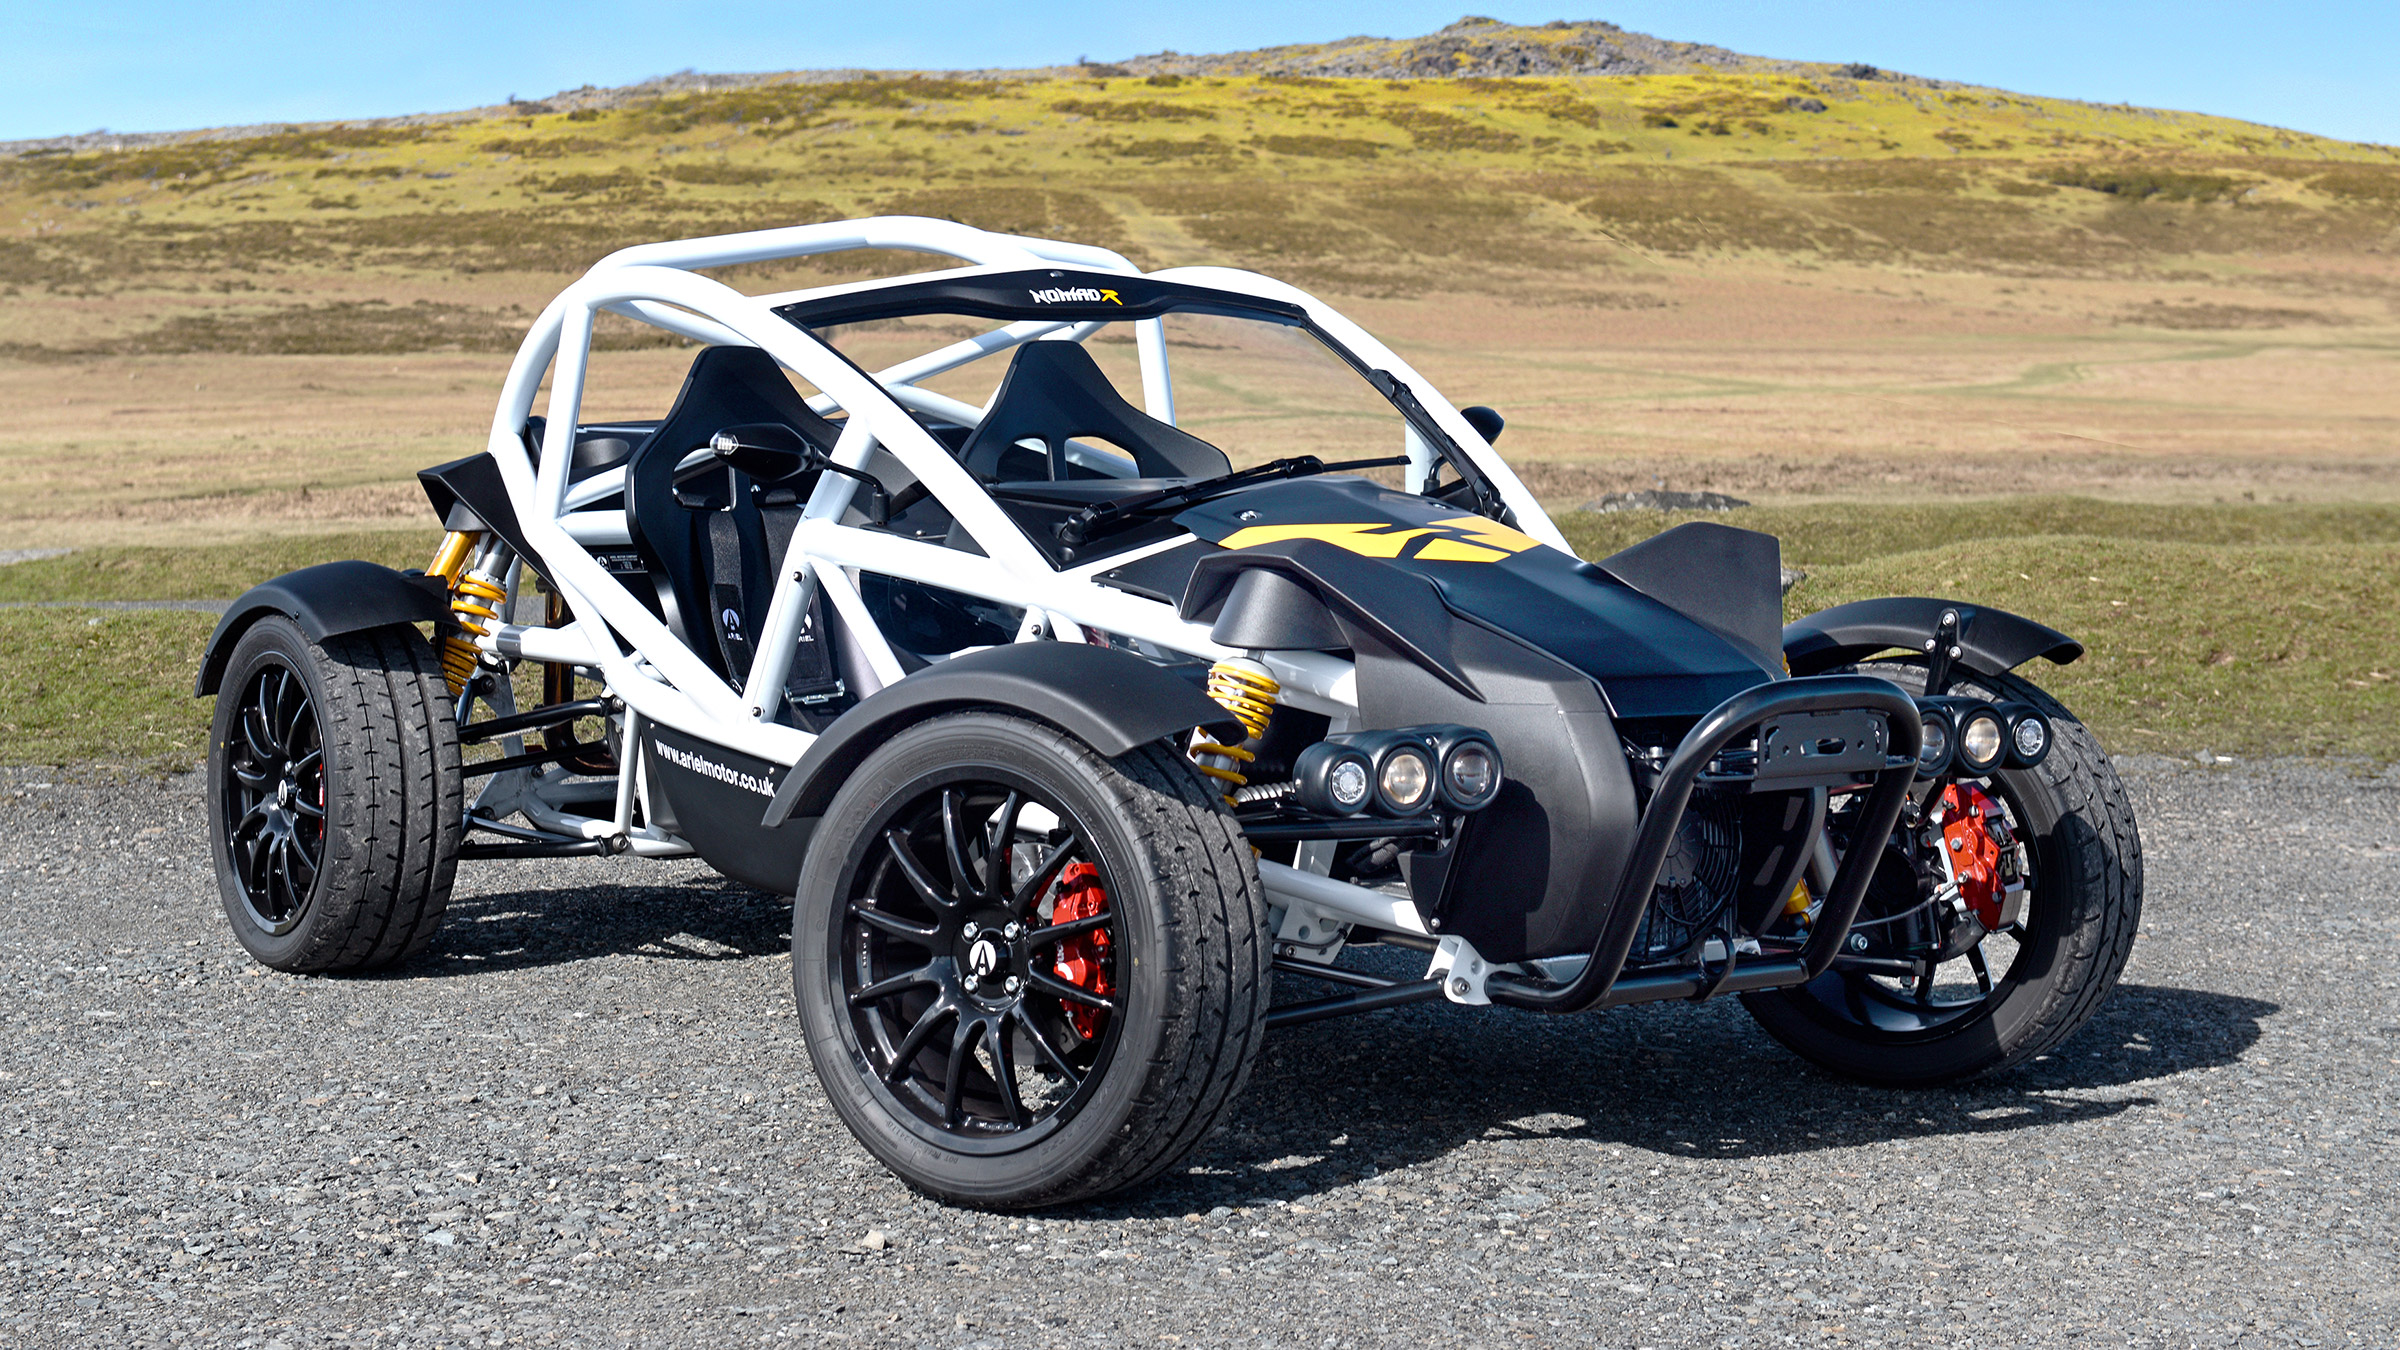 Ellendig mild Draad Ariel Nomad R revealed with 335bhp supercharged four and road-bias | evo